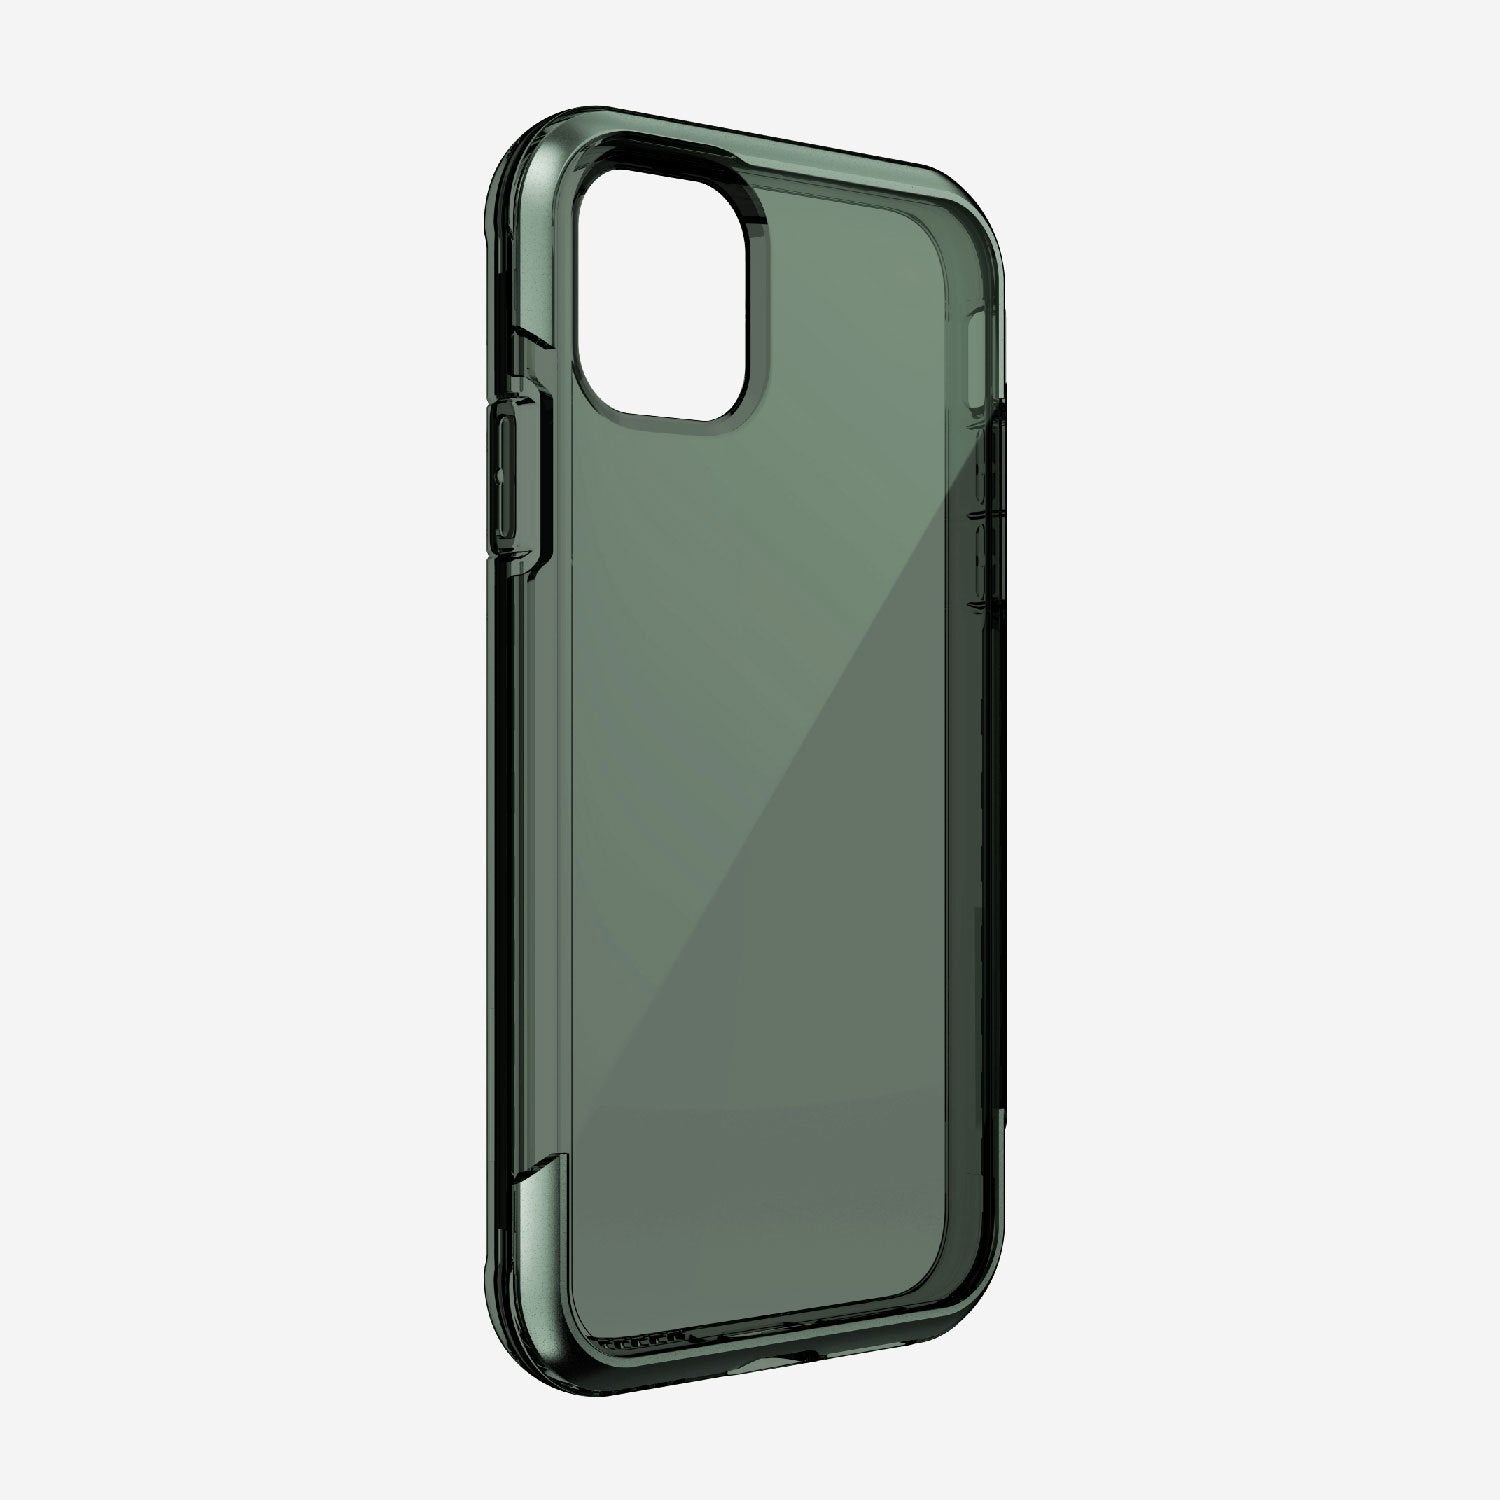 The back view of a green Raptic Air iPhone 11 Case with wireless charging capability.